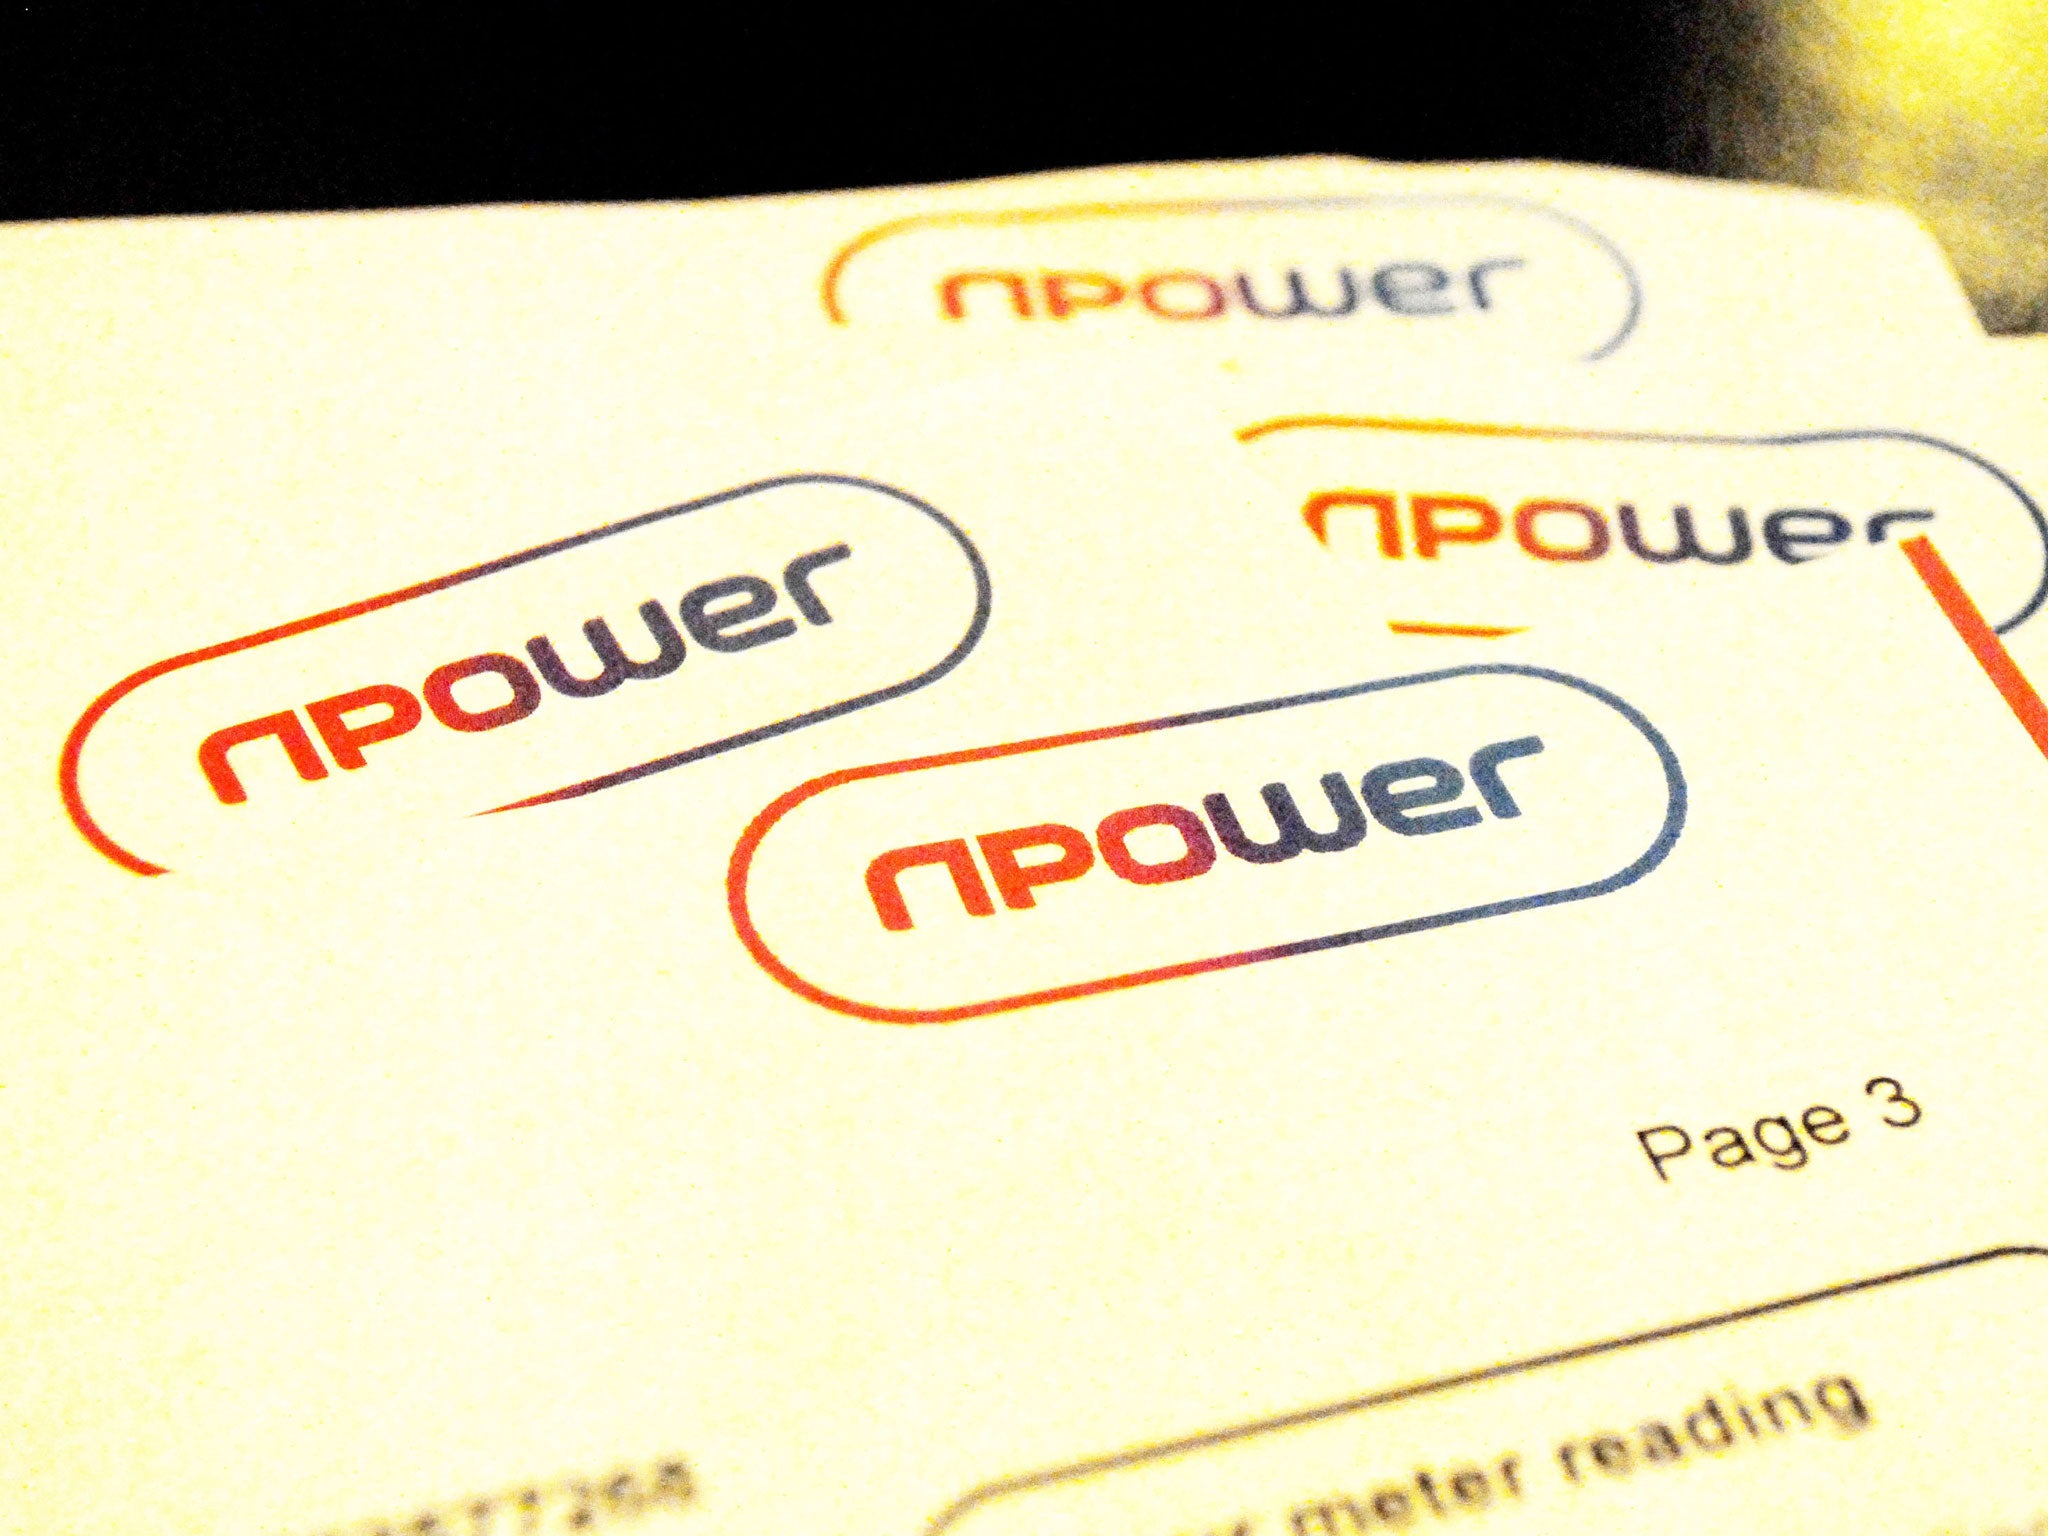 Energy giant NPower admited it hasn’t paid corporation tax in the UK for three years